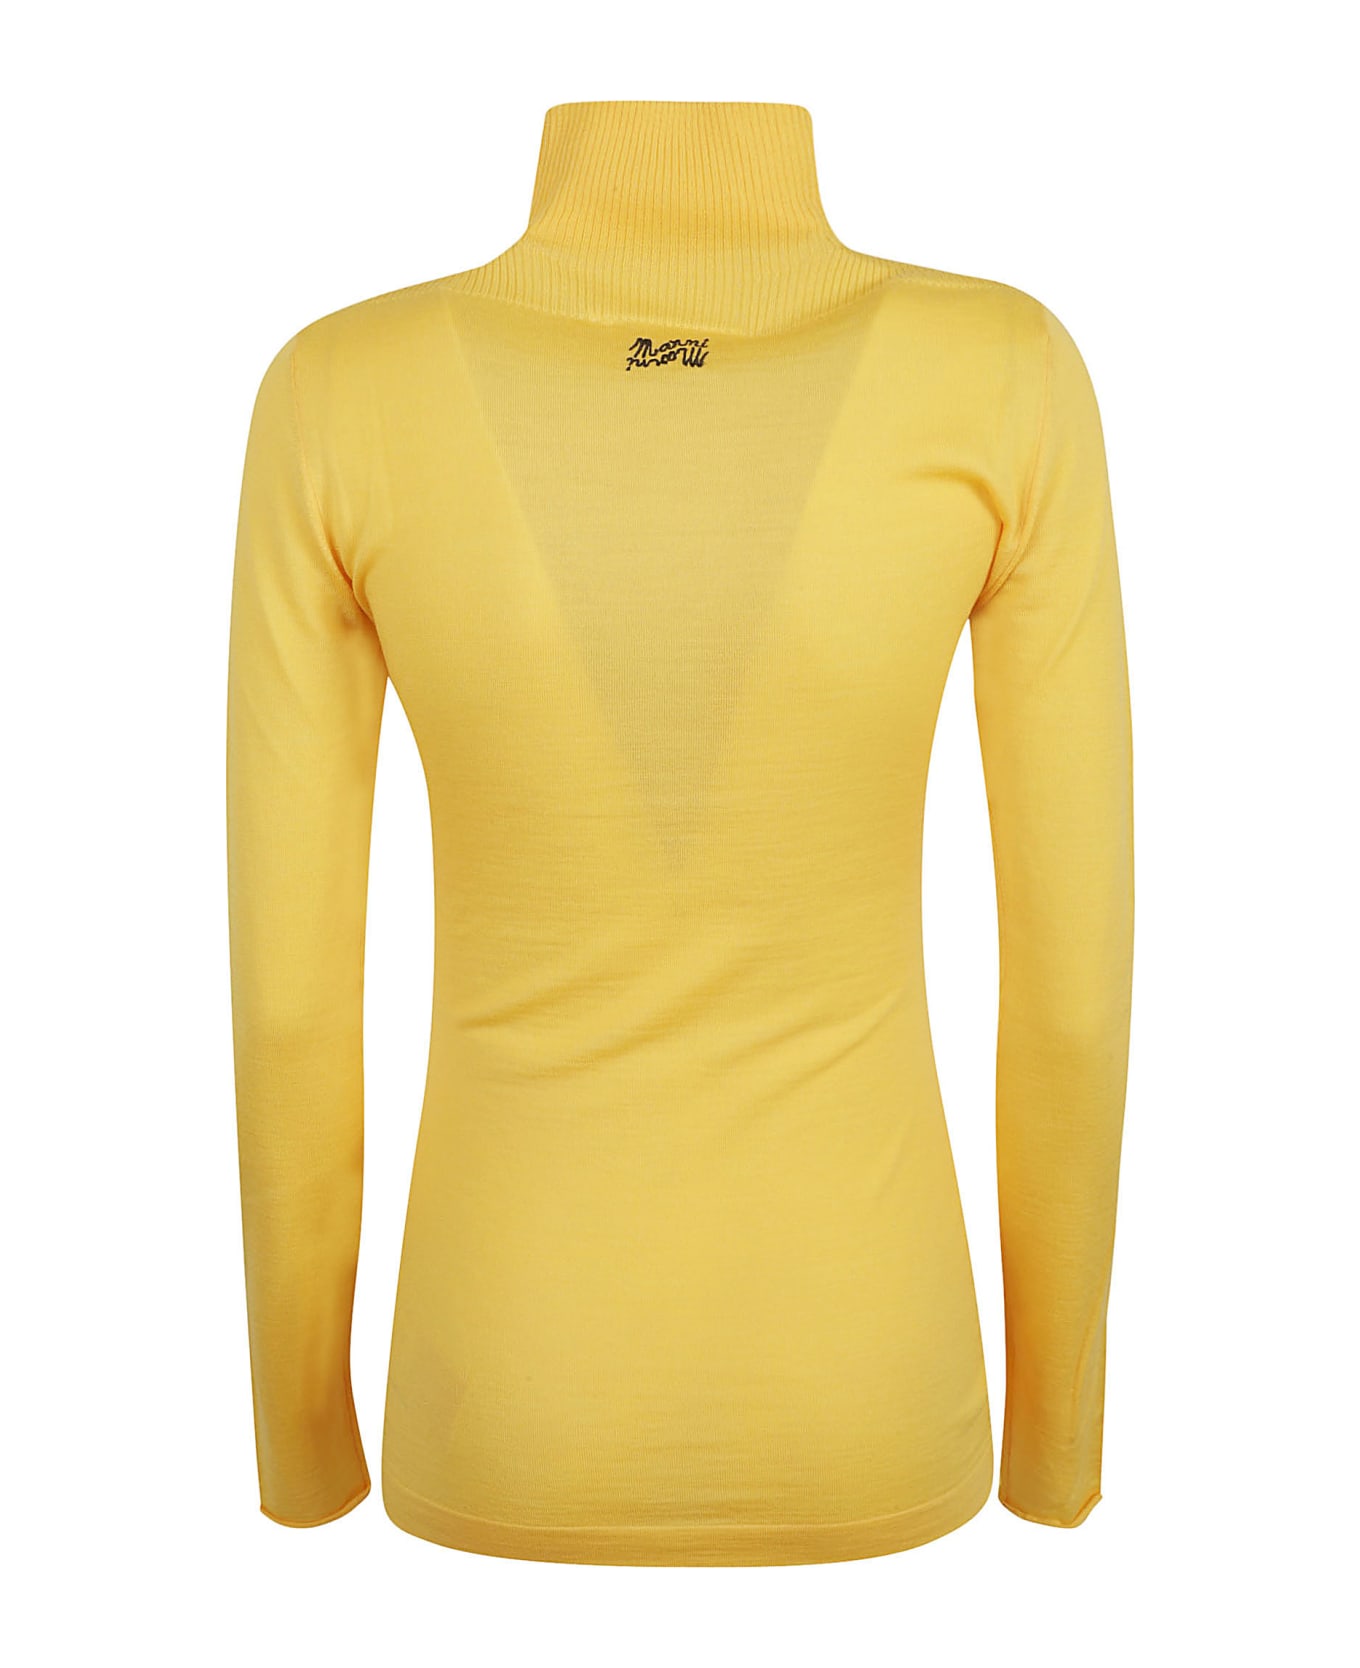 Marni Turtleneck Fitted Jumper - YELLOW